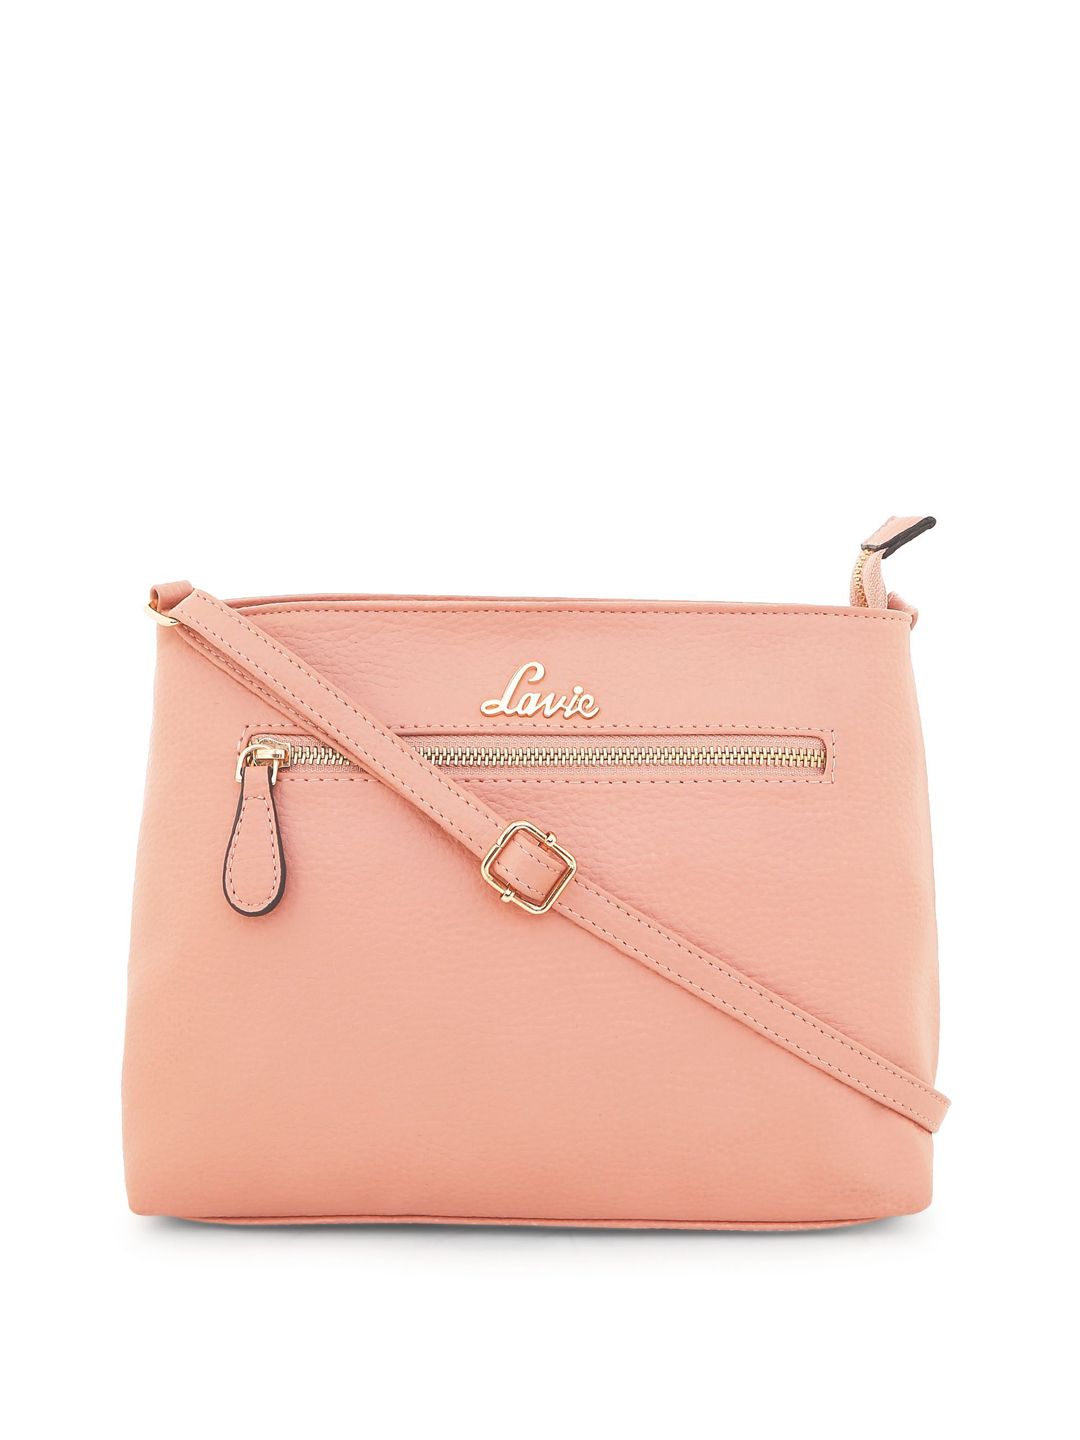 Lavie Peach-Coloured Solid Sling Bag Price in India